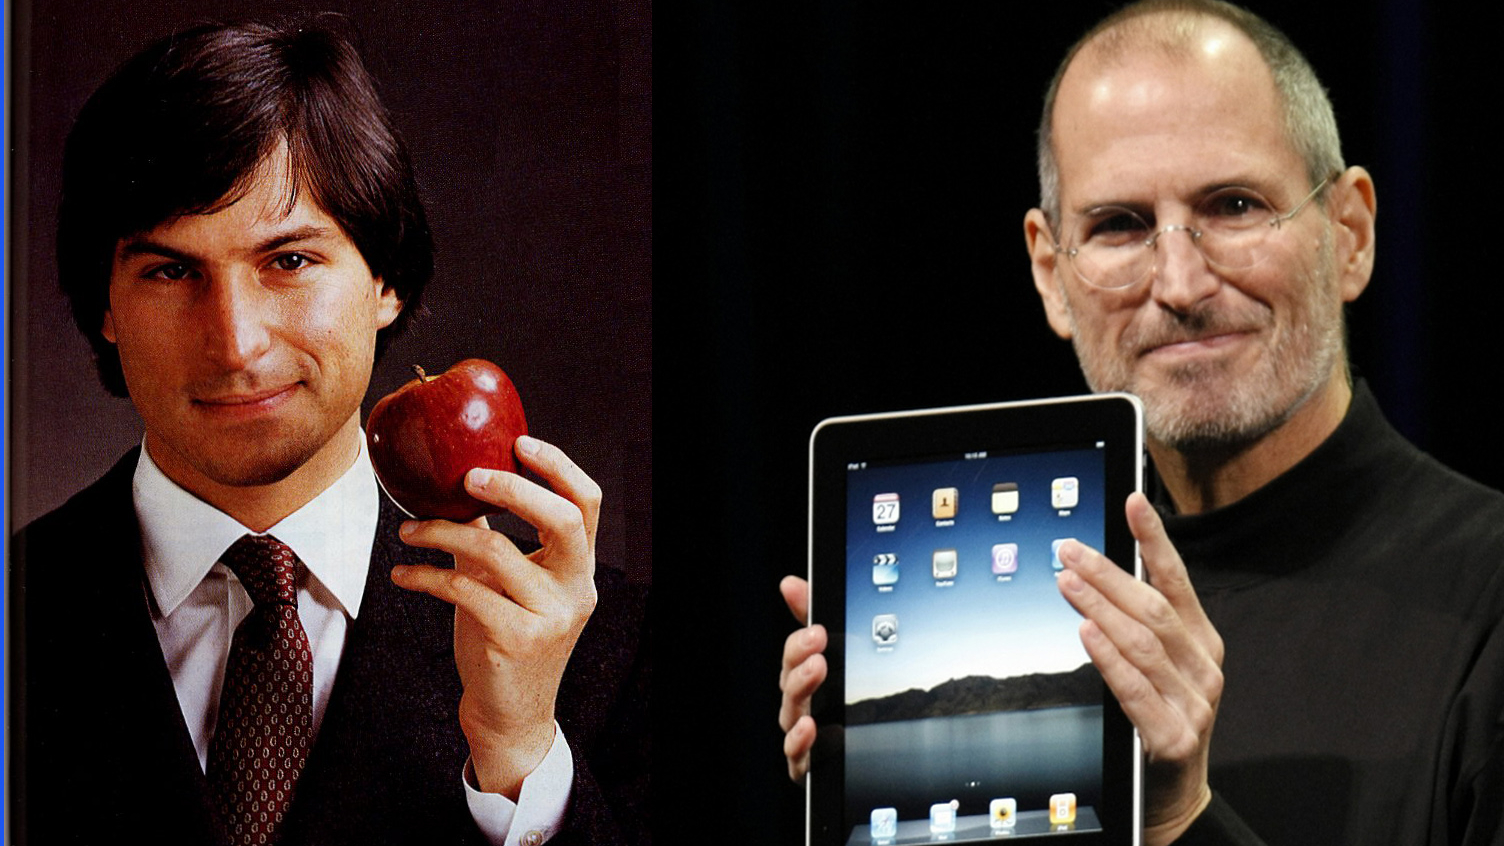 Then and now: The legacy of Steve Jobs